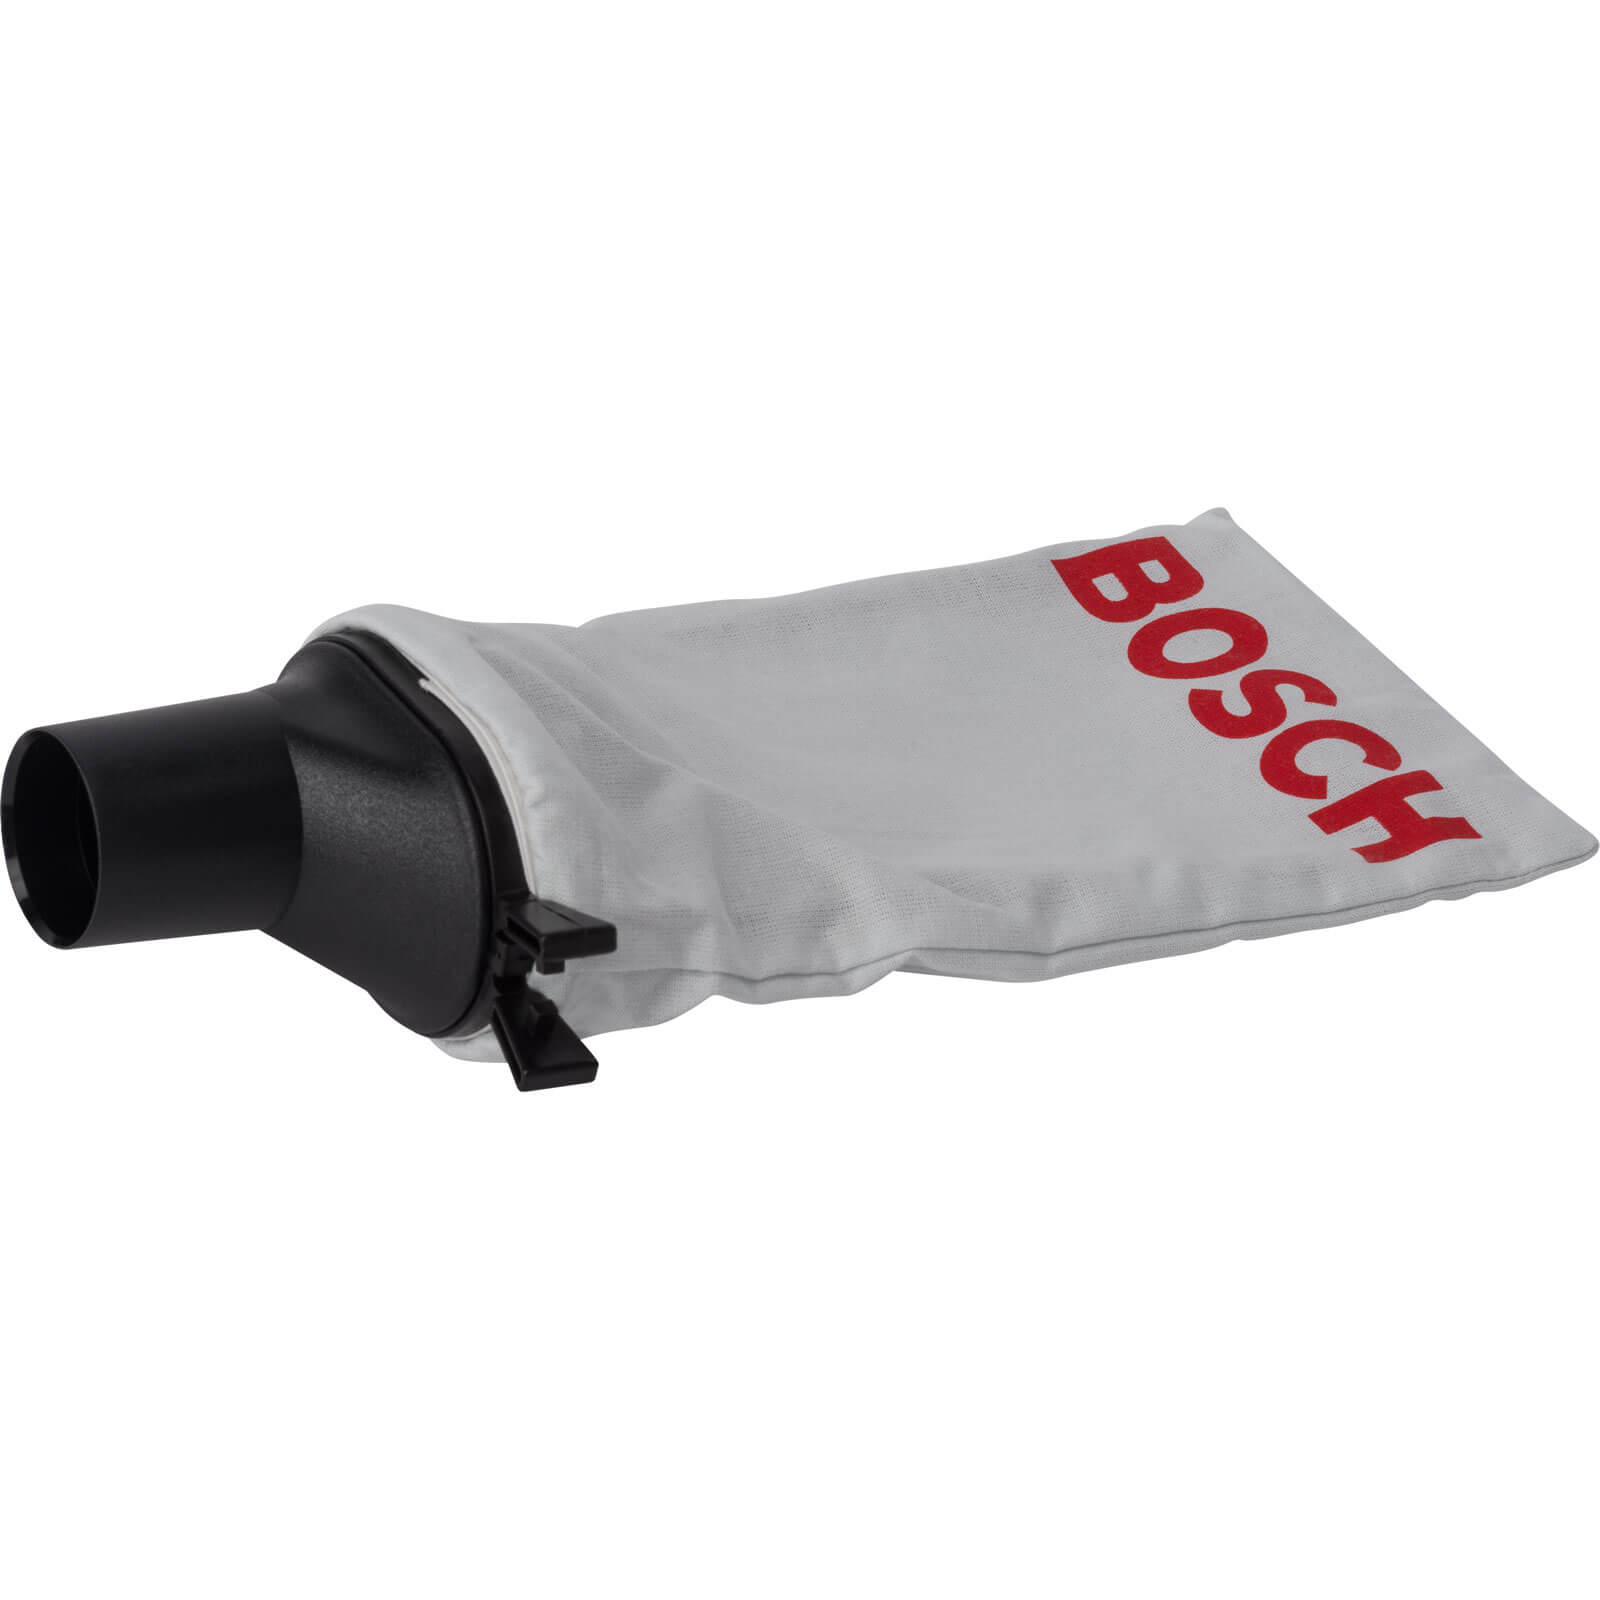 Image of Bosch Dust Bag for Handheld Circular Saws